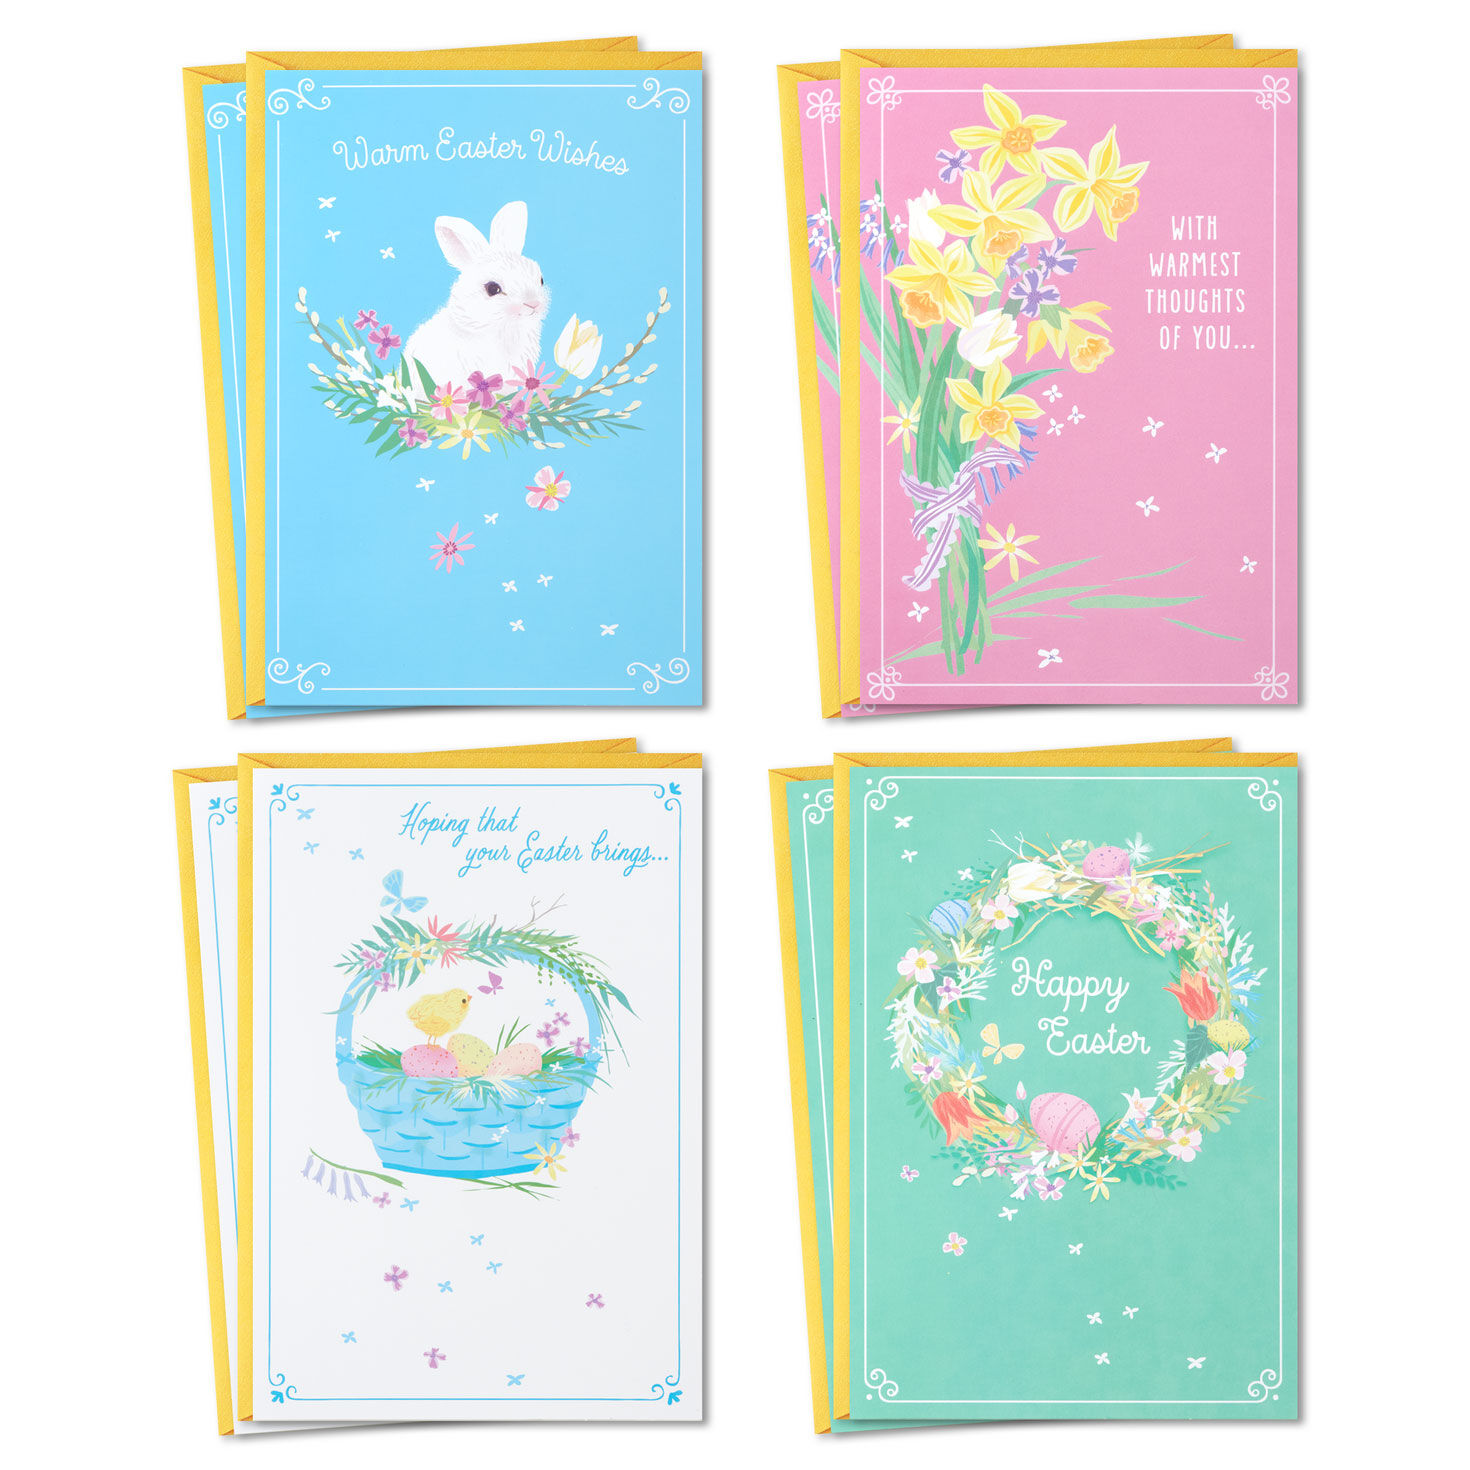 Sweet Illustrations Assorted Easter Cards, Pack of 8 for only USD 6.99 | Hallmark